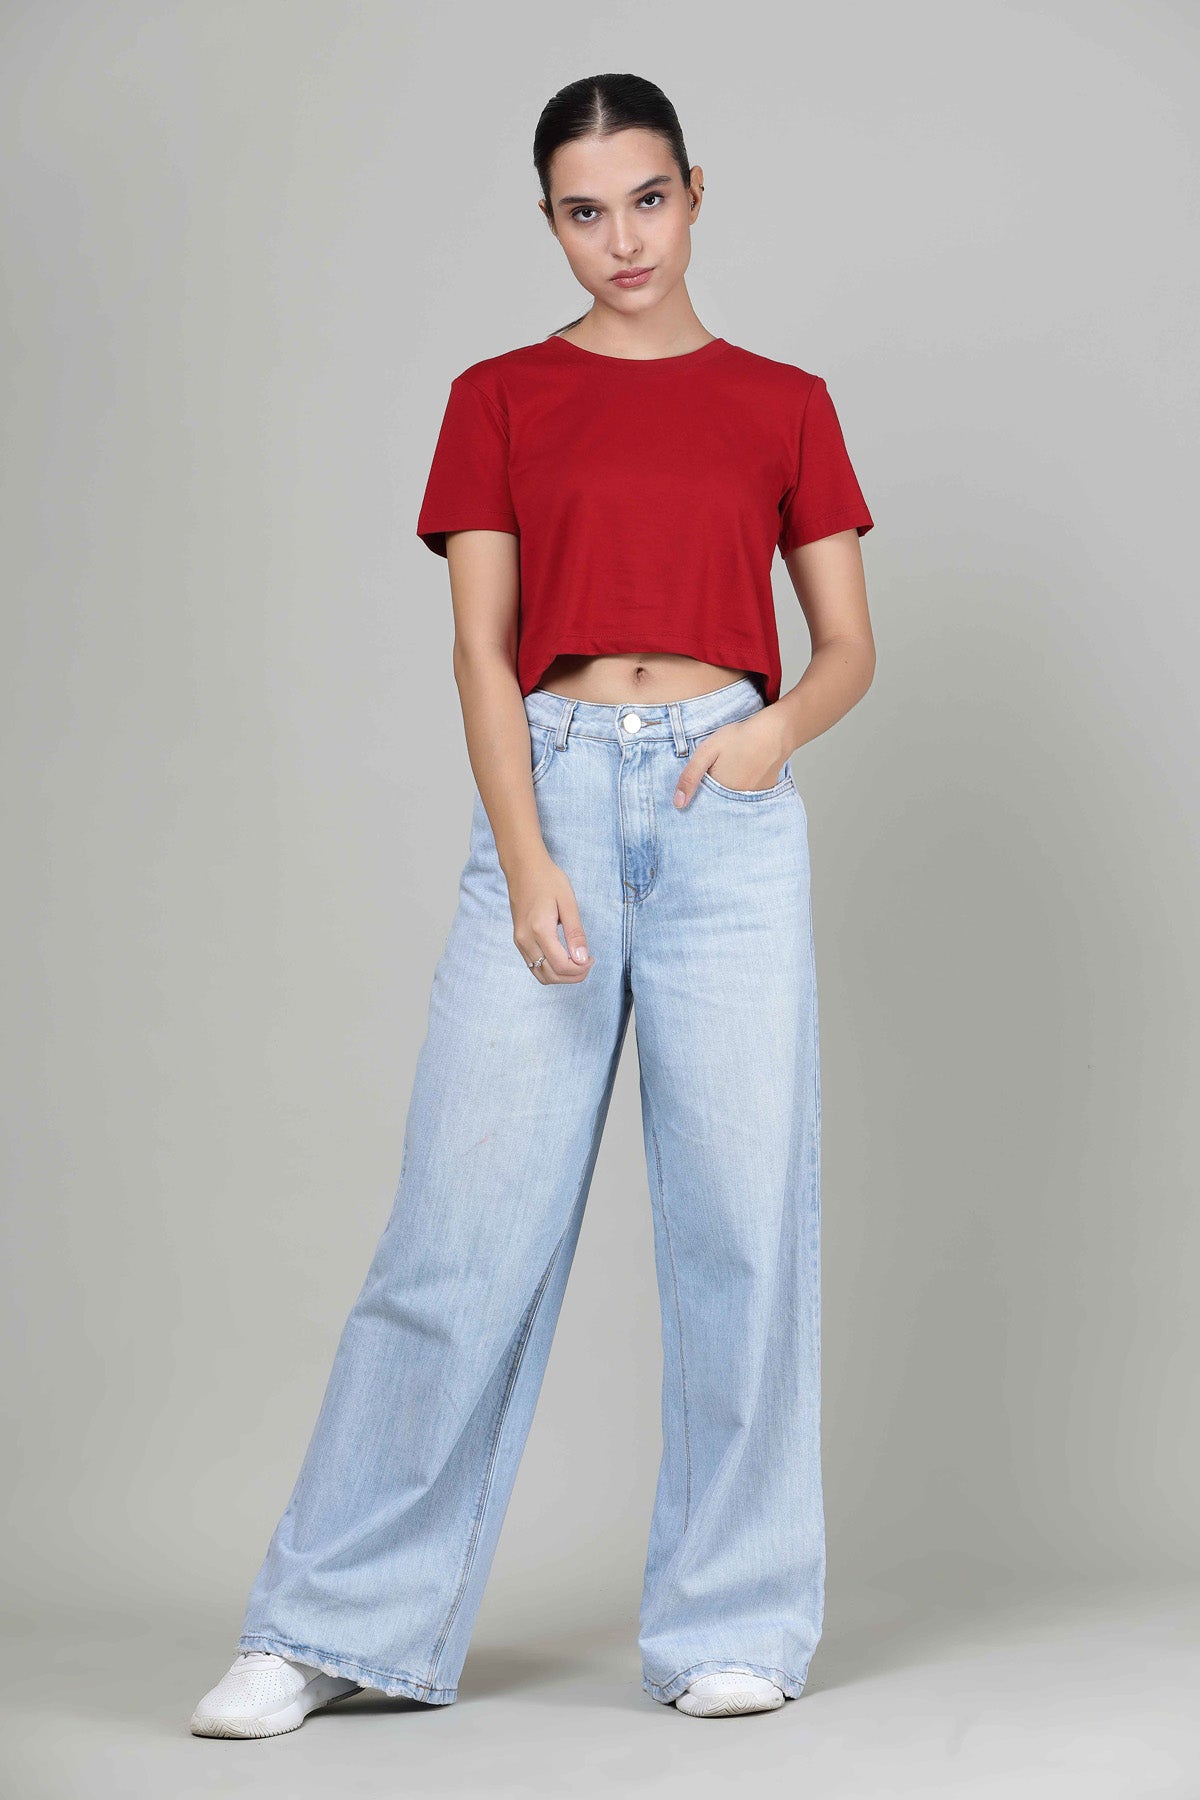 Knockout Red - Crop Top